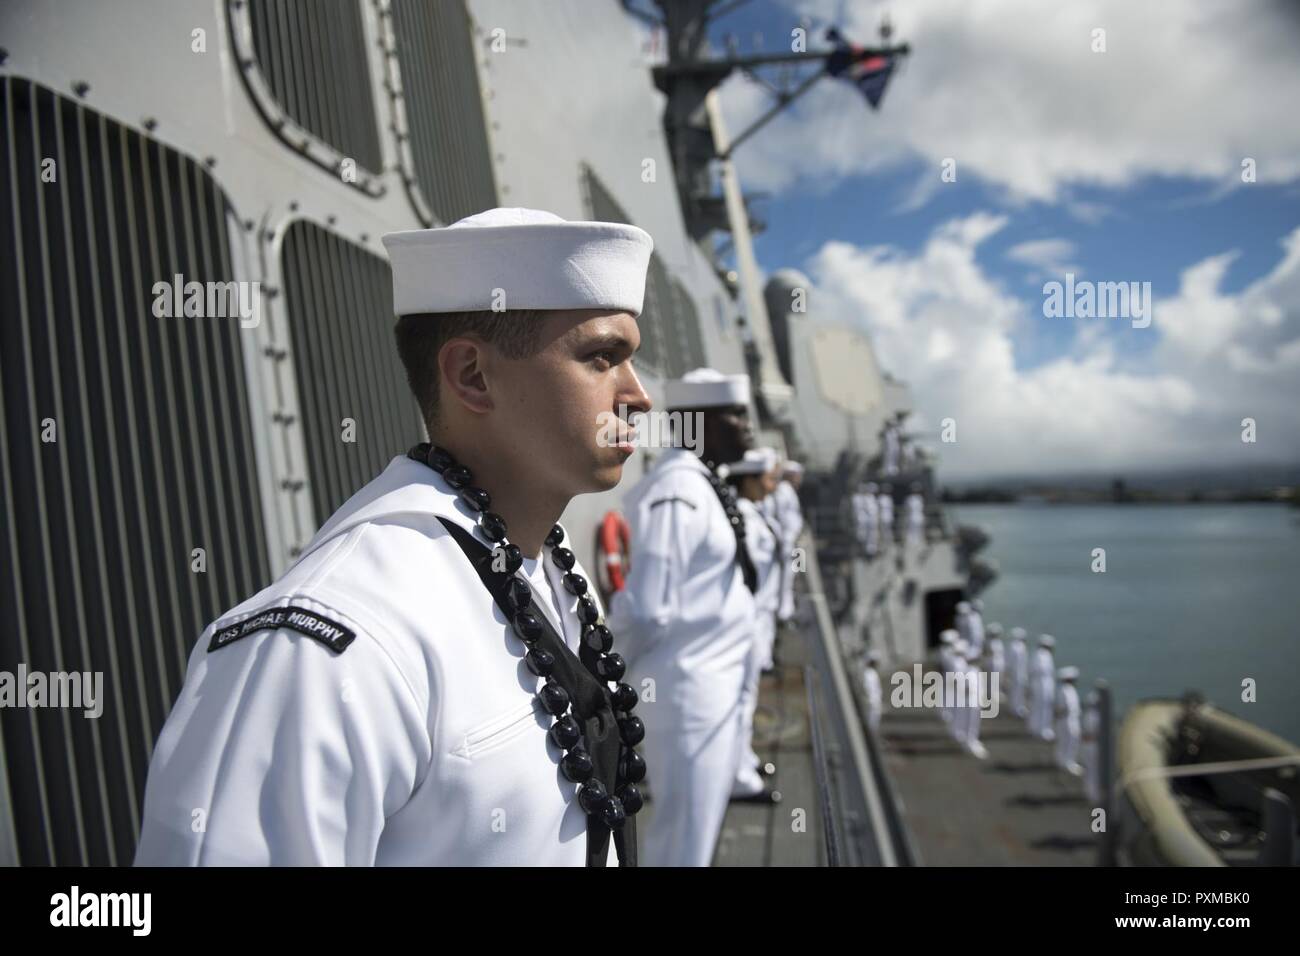 PEARL HARBOR (June 13, 2017) Machinist’s Mate 2nd Class Nick Magarelli, from Fair Lawn, New Jersey, mans the rails aboard Arleigh Burke-class guided-missile destroyer USS Michael Murphy (DDG 112) as the ship returns to its homeport Joint Base Pearl Harbor-Hickam after a 5-month deployment. Michael Murphy was on a Western Pacific deployment in the Indo-Asia-Pacific region as part of the Carl Vinson Carrier Strike Group. Stock Photo